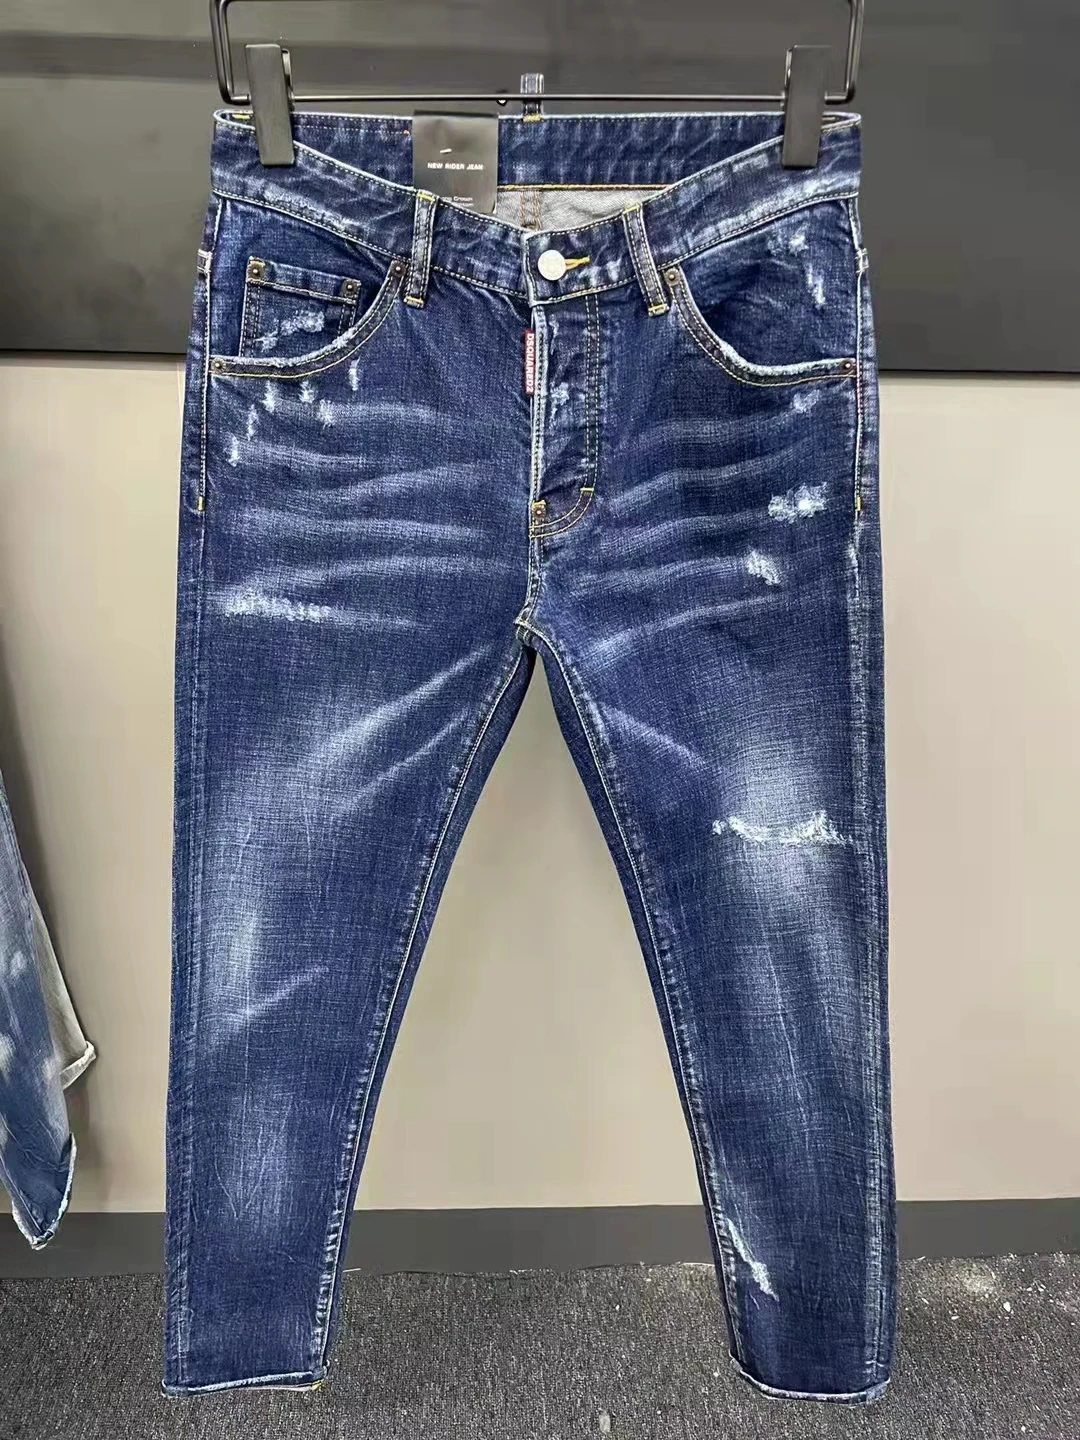 

2022 Italian Fashion Brand DSQ2 Men's Washed, Worn, Ripped, Paint-Spotted Motorcycle Jeans 078